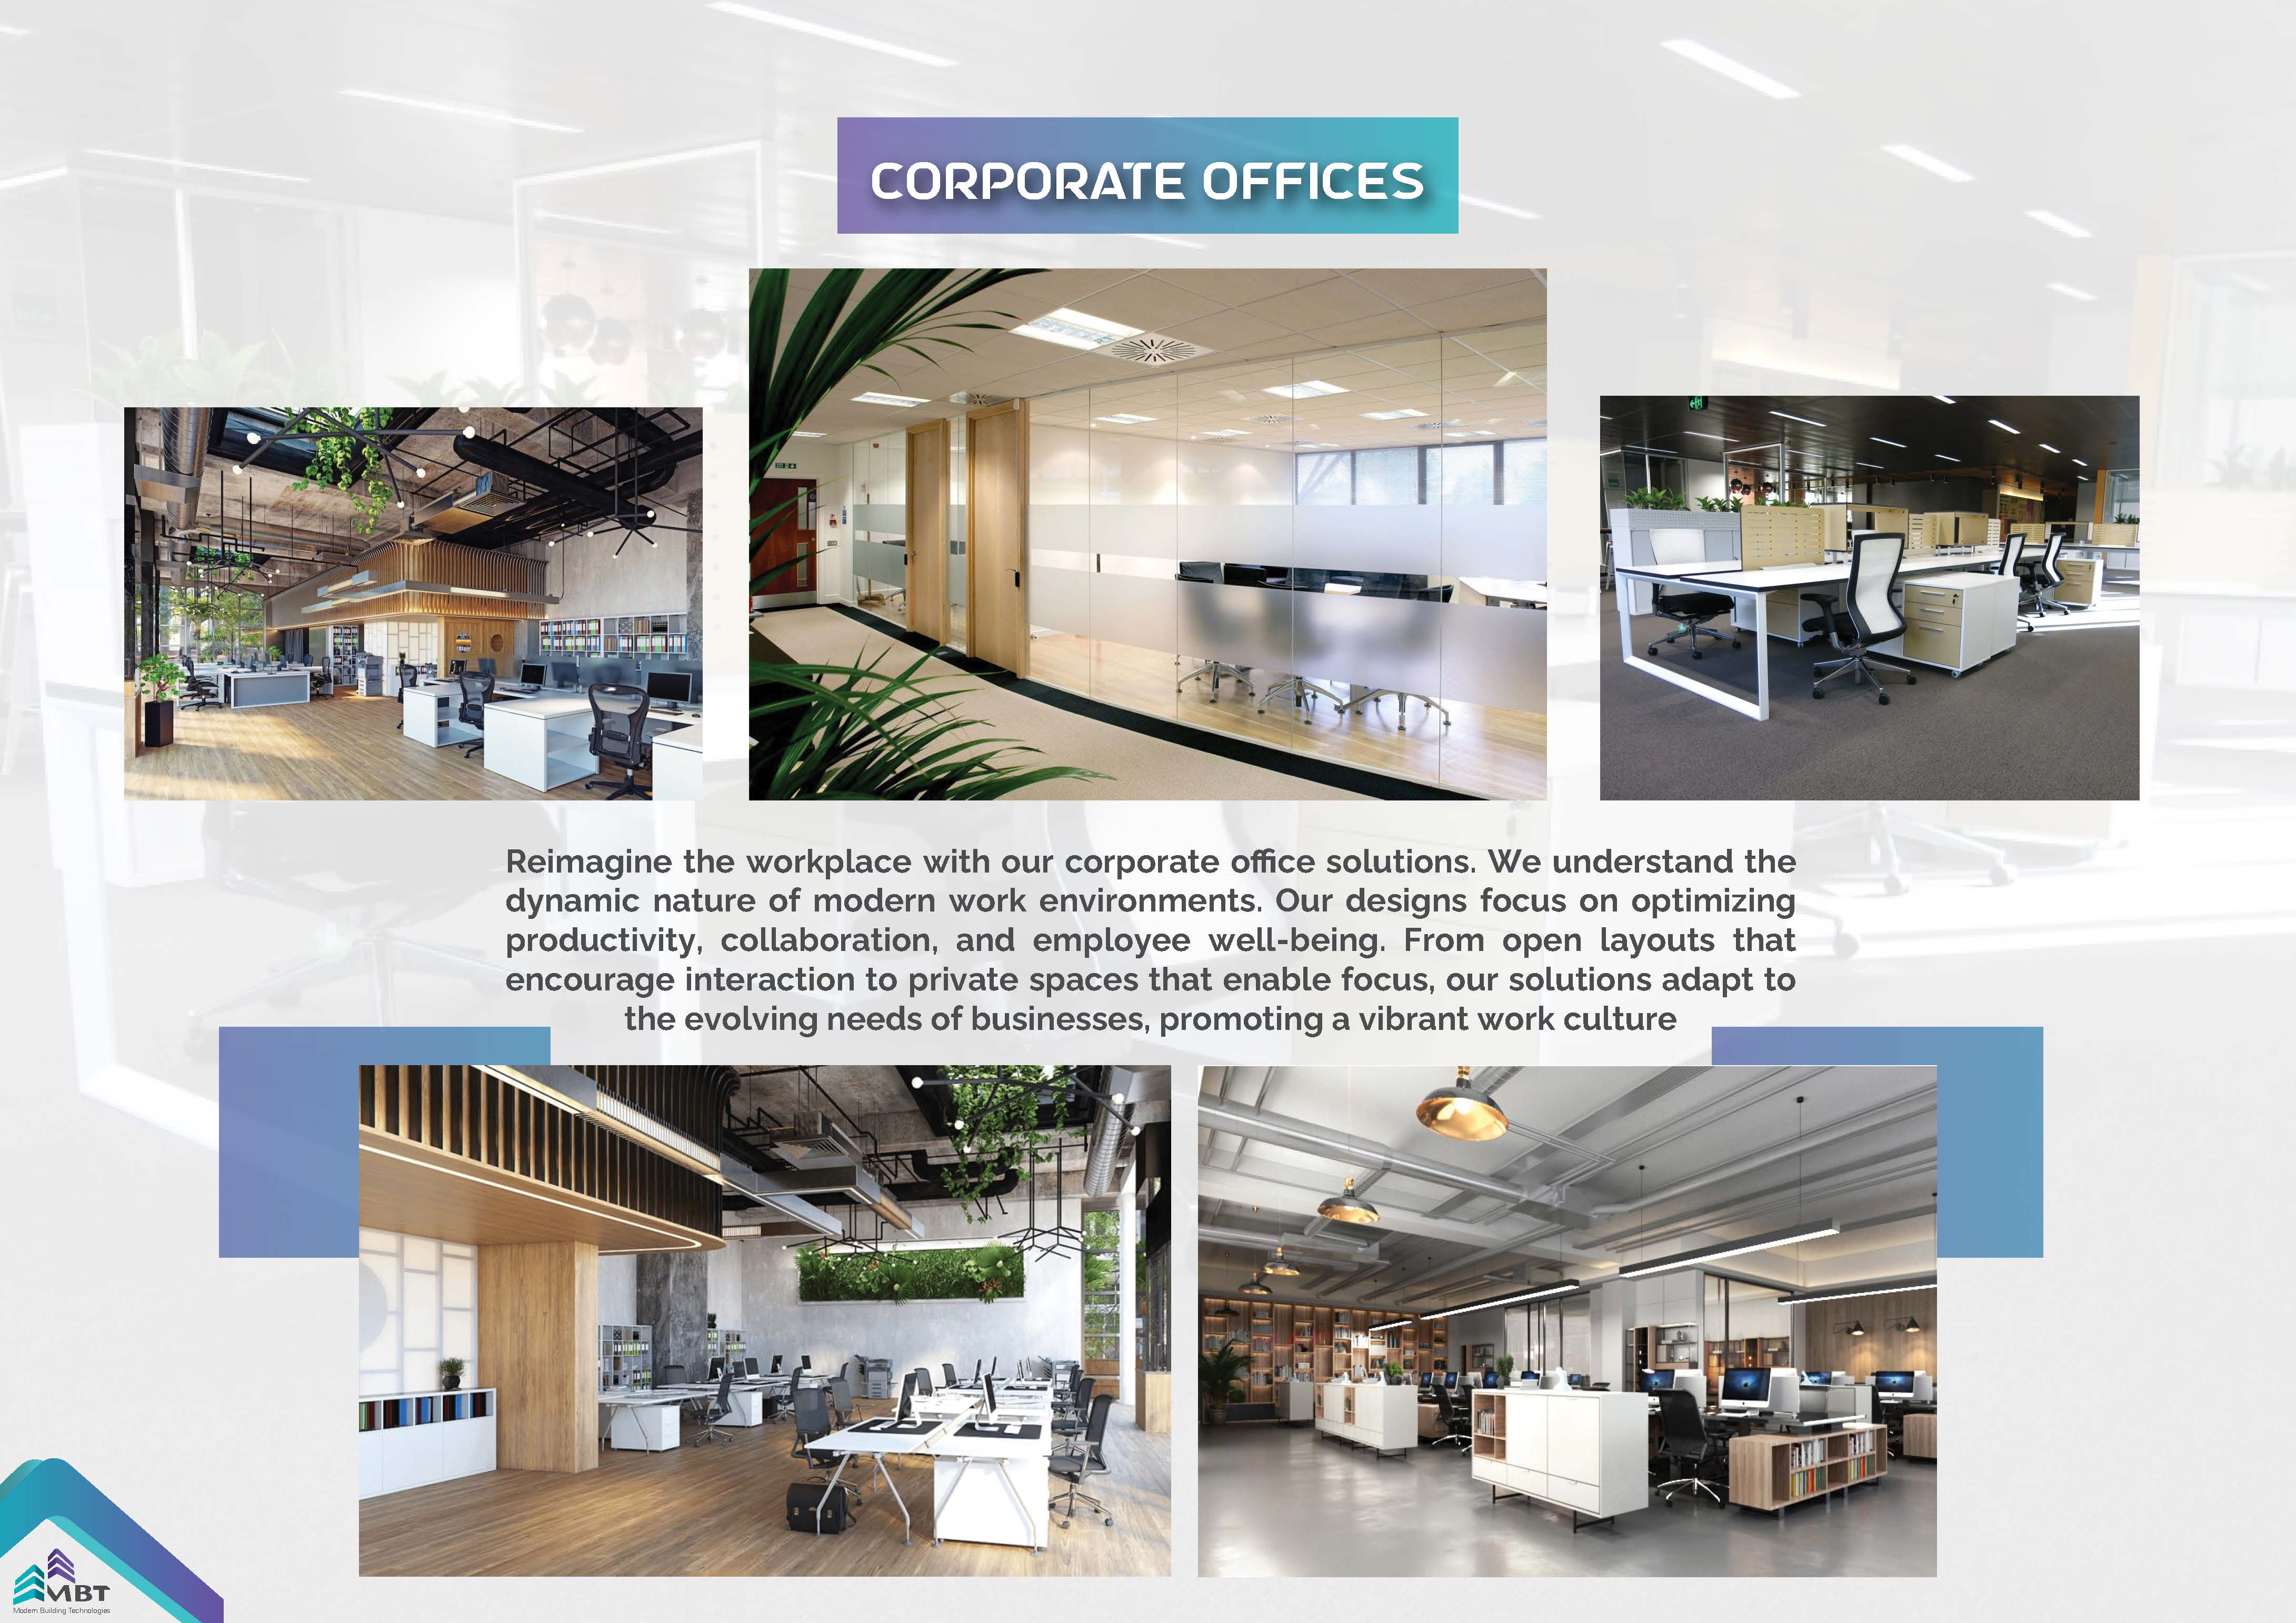 mbt fit out commercial corporate offices